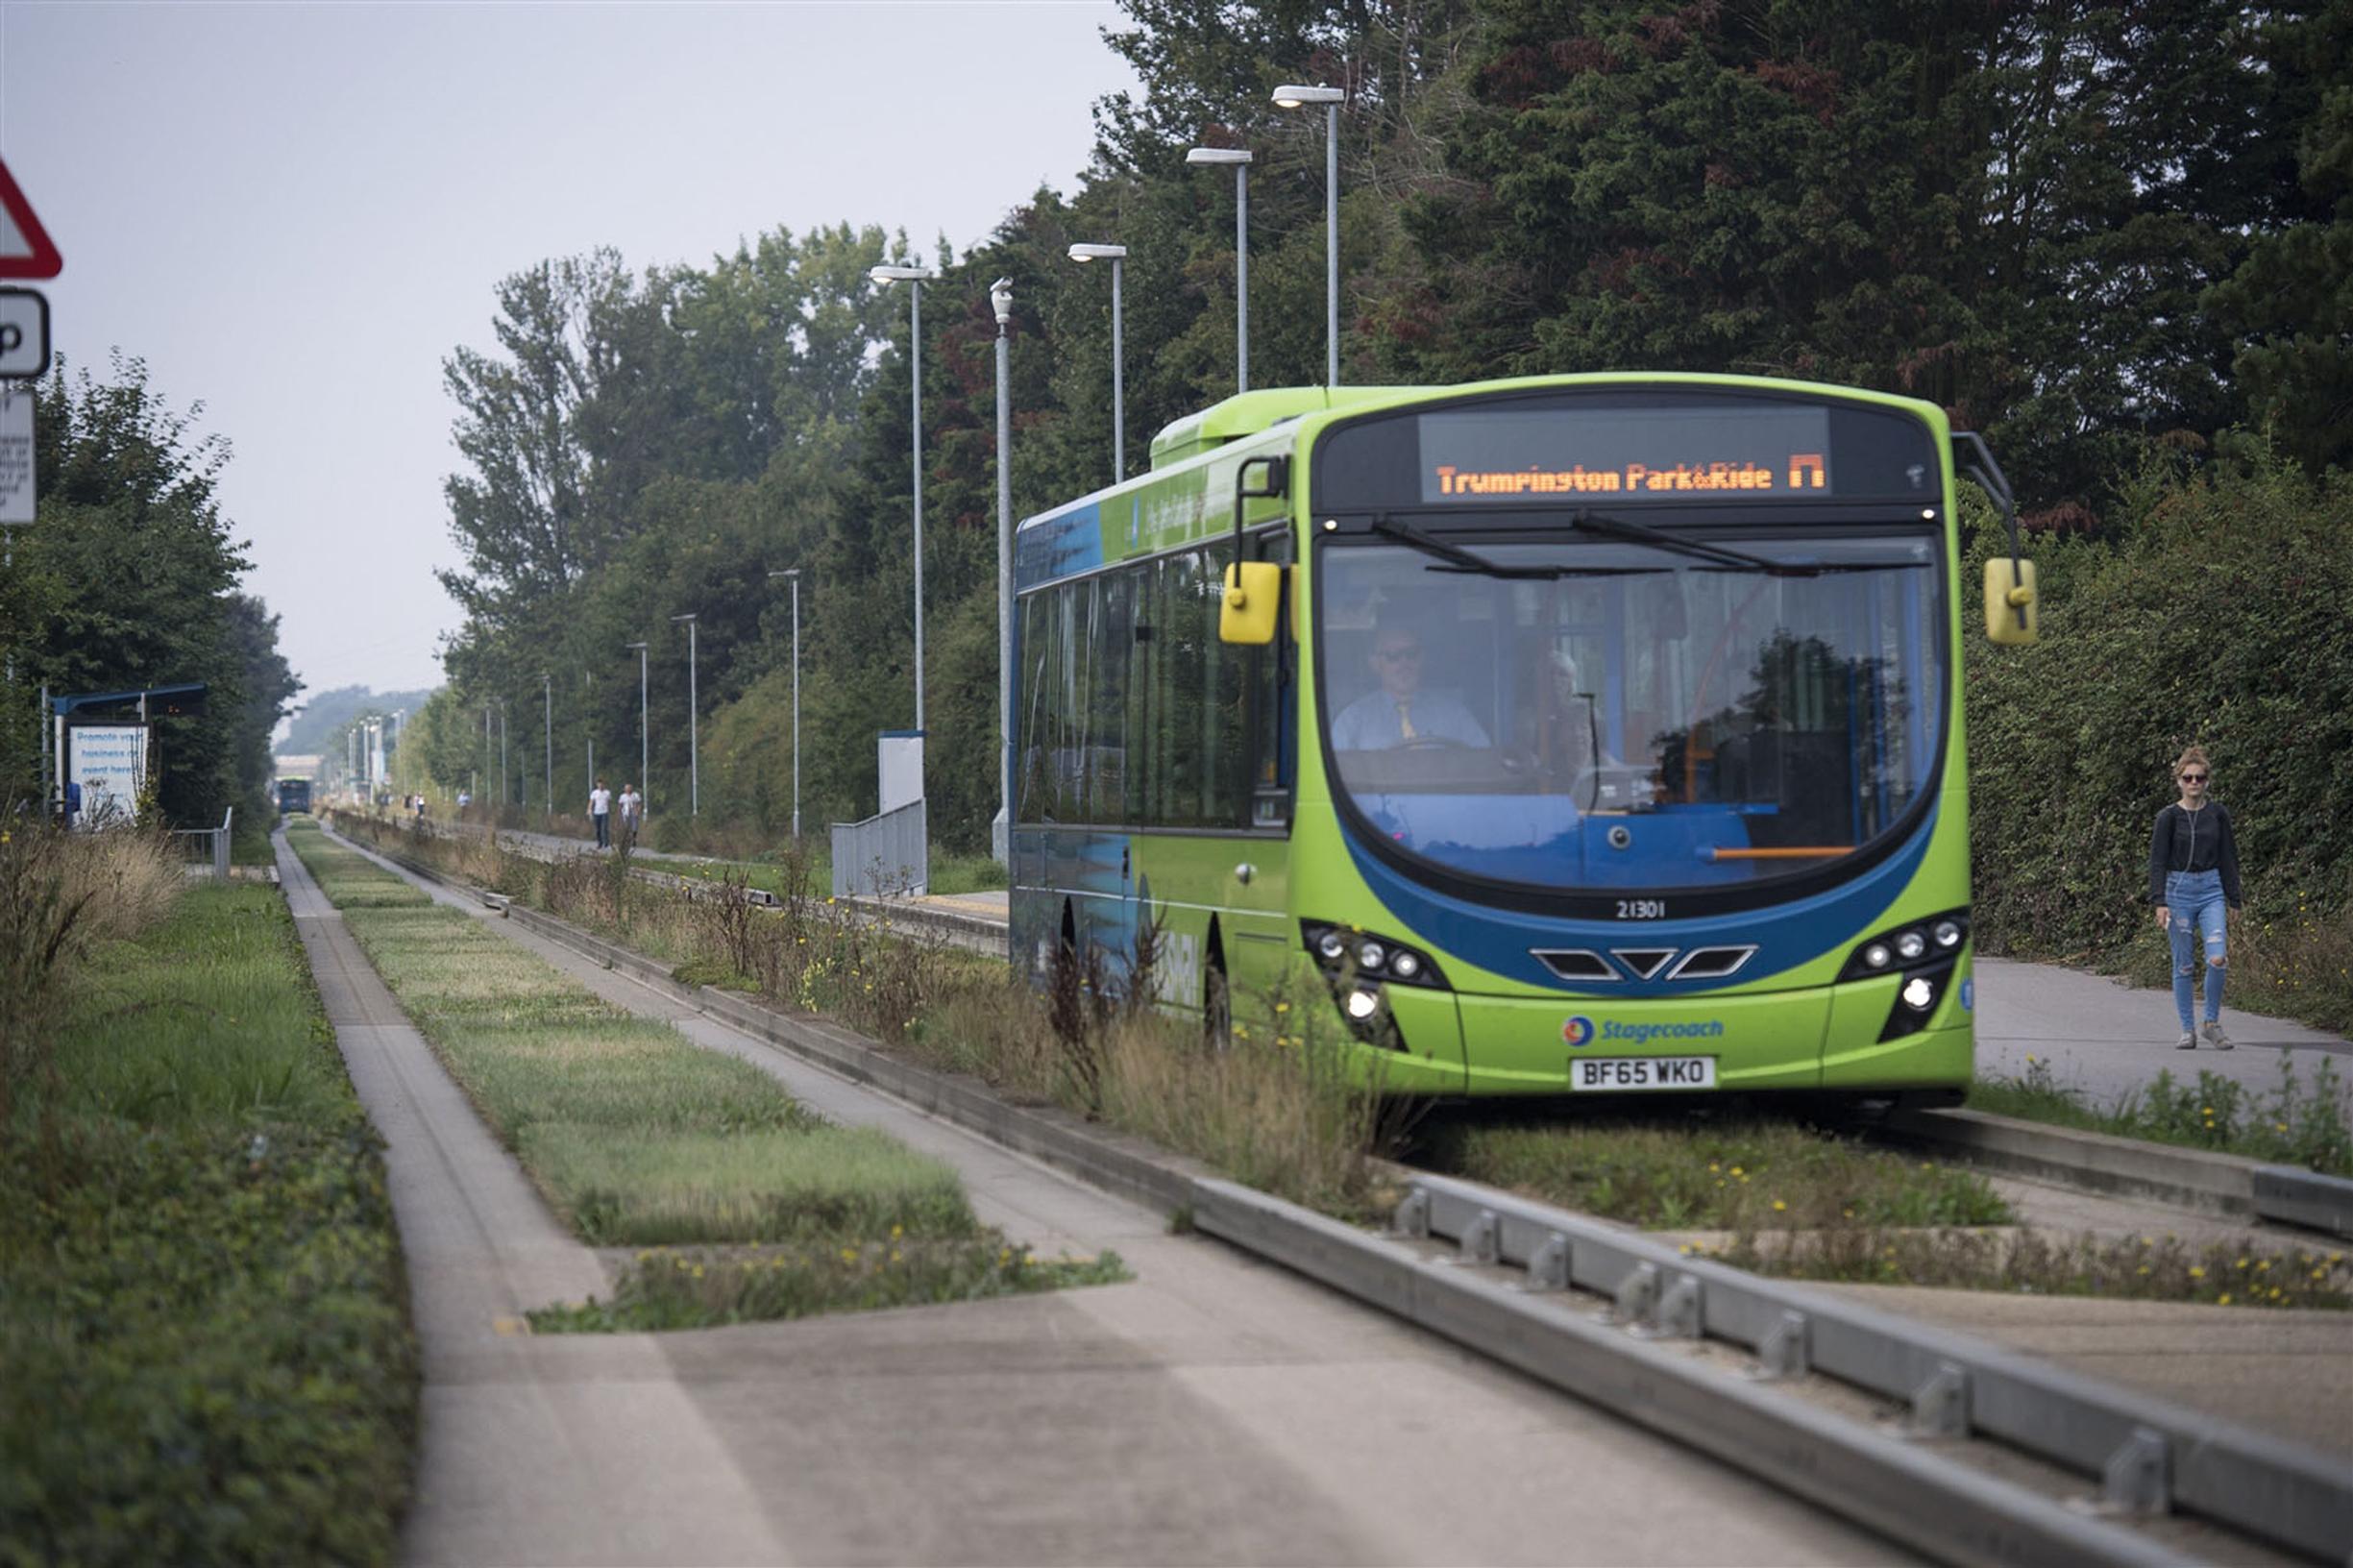 A column in The Cambridge Independent in early June was strongly critical of the city’s existing guided busway and plans for more busways